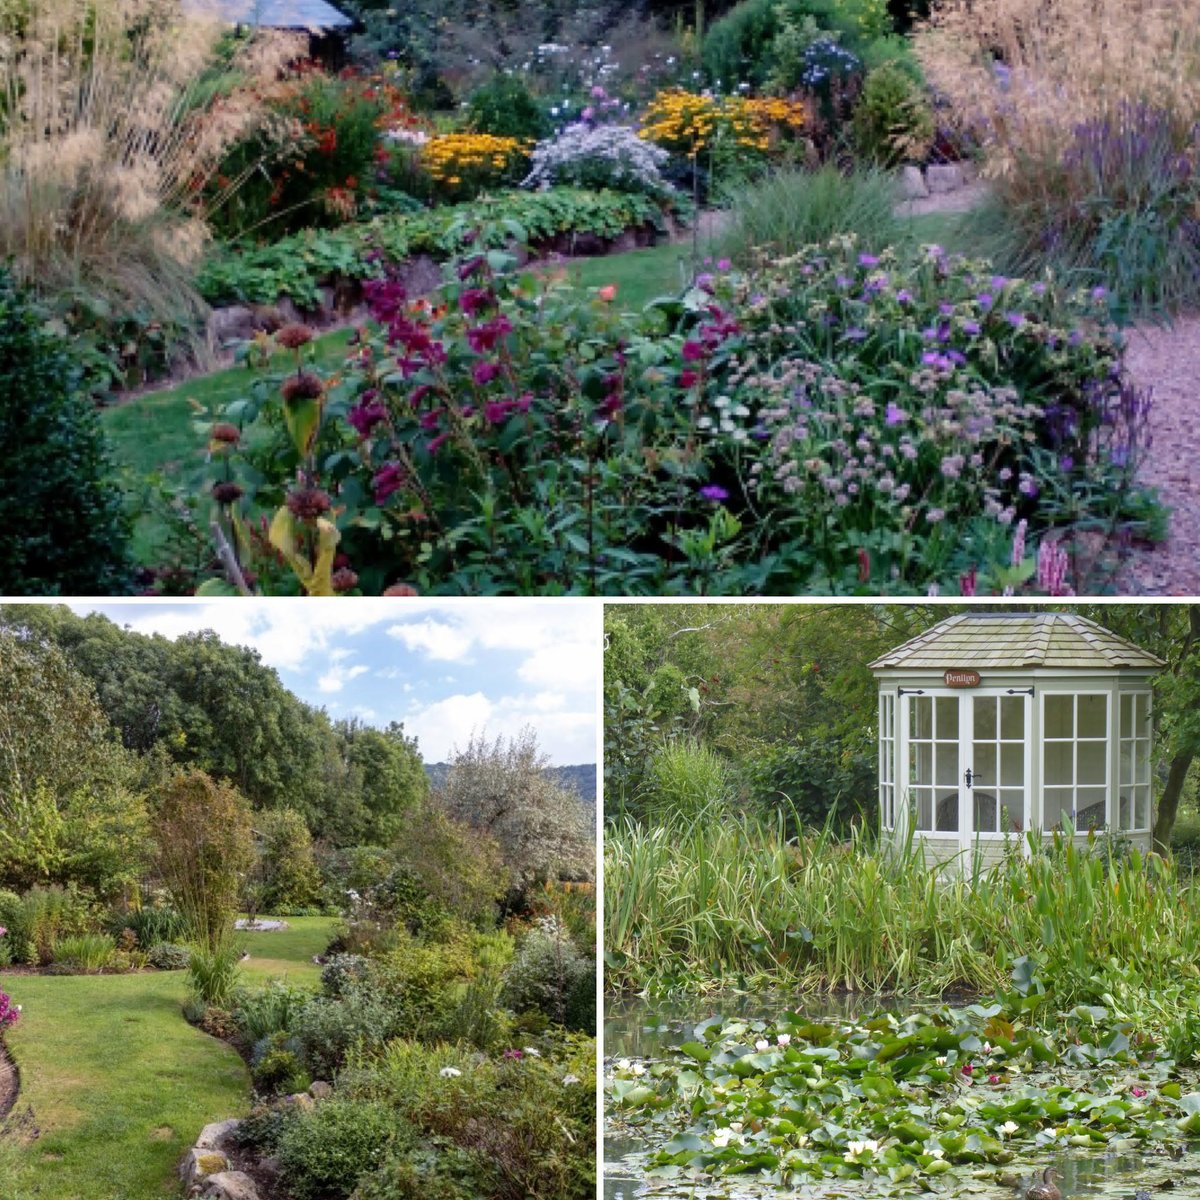 We've got three lovely late summer gardens for you to visit this weekend. Clouds Rest and The Patch, both at Brockweir, and Trench Hill at Sheepscombe will all be open on Sunday September 10. More details on the website: ngs.org.uk